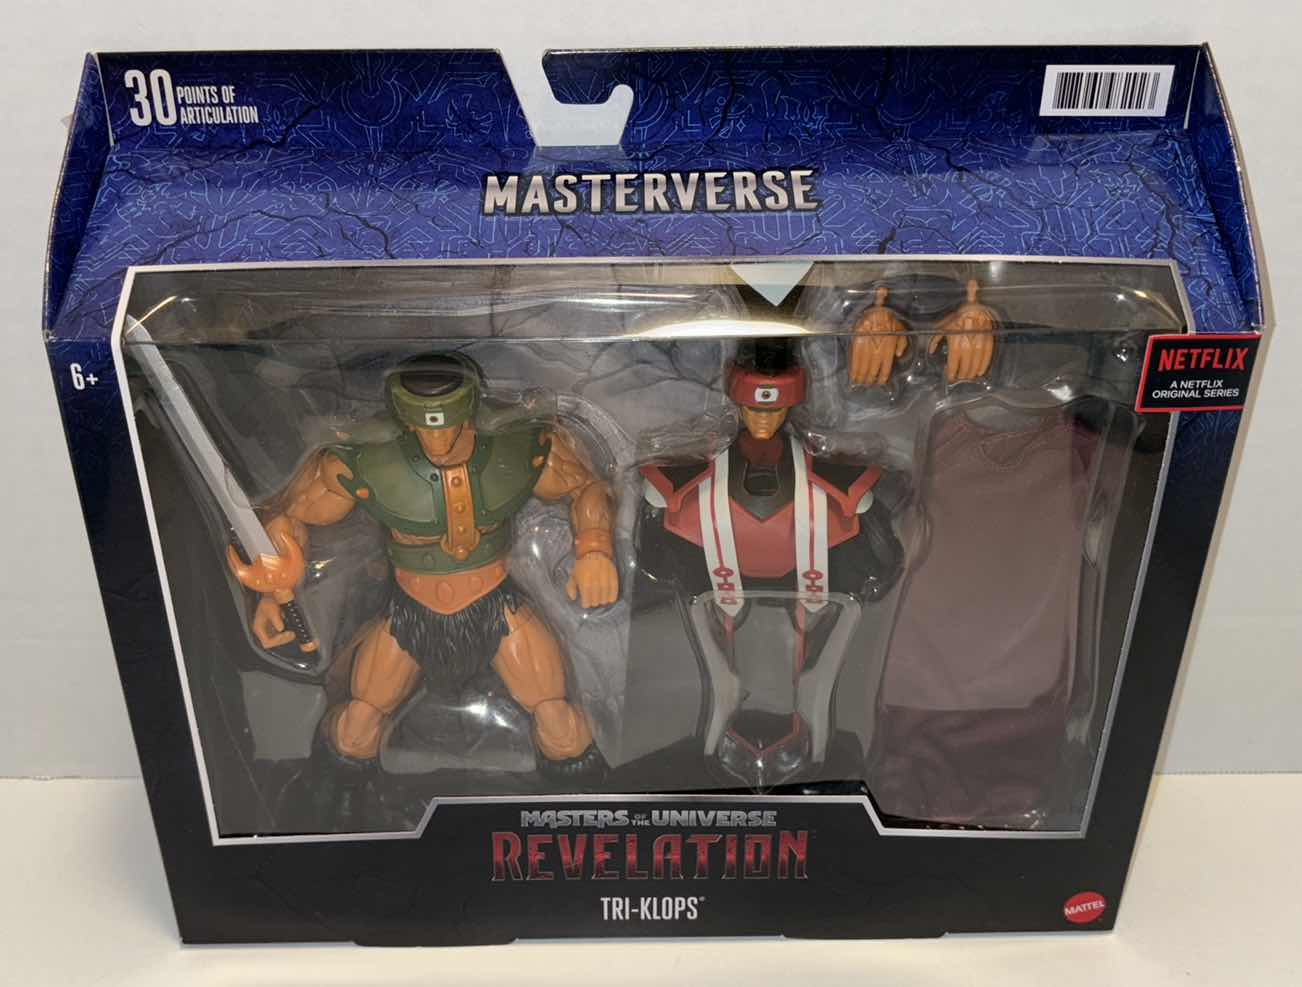 Photo 1 of NEW MATTEL MASTERVERSE MASTERS OF THE UNIVERSE REVELATION “TRI-KLOPS” ACTION FIGURE & ACCESSORIES (1)